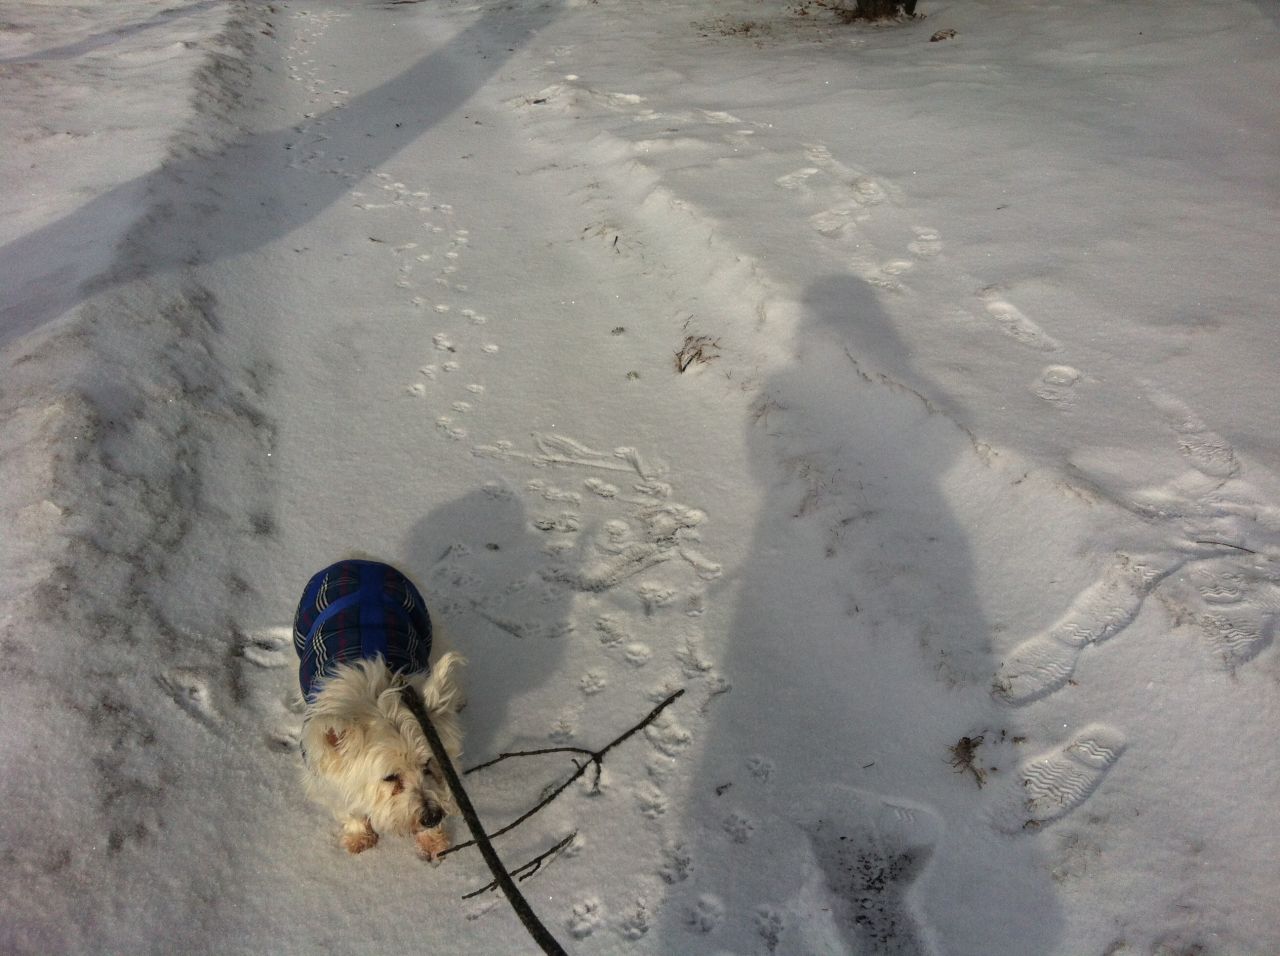 <a href="http://ireport.cnn.com/docs/DOC-919168" target="_blank">iReporter Jannet Walsh</a> snapped this photo her shadow along with her 14-year-old dog Andrew. "It's been hard to walk the dog in the brutally cold arctic weather, as I am too cold to walk him," she said.